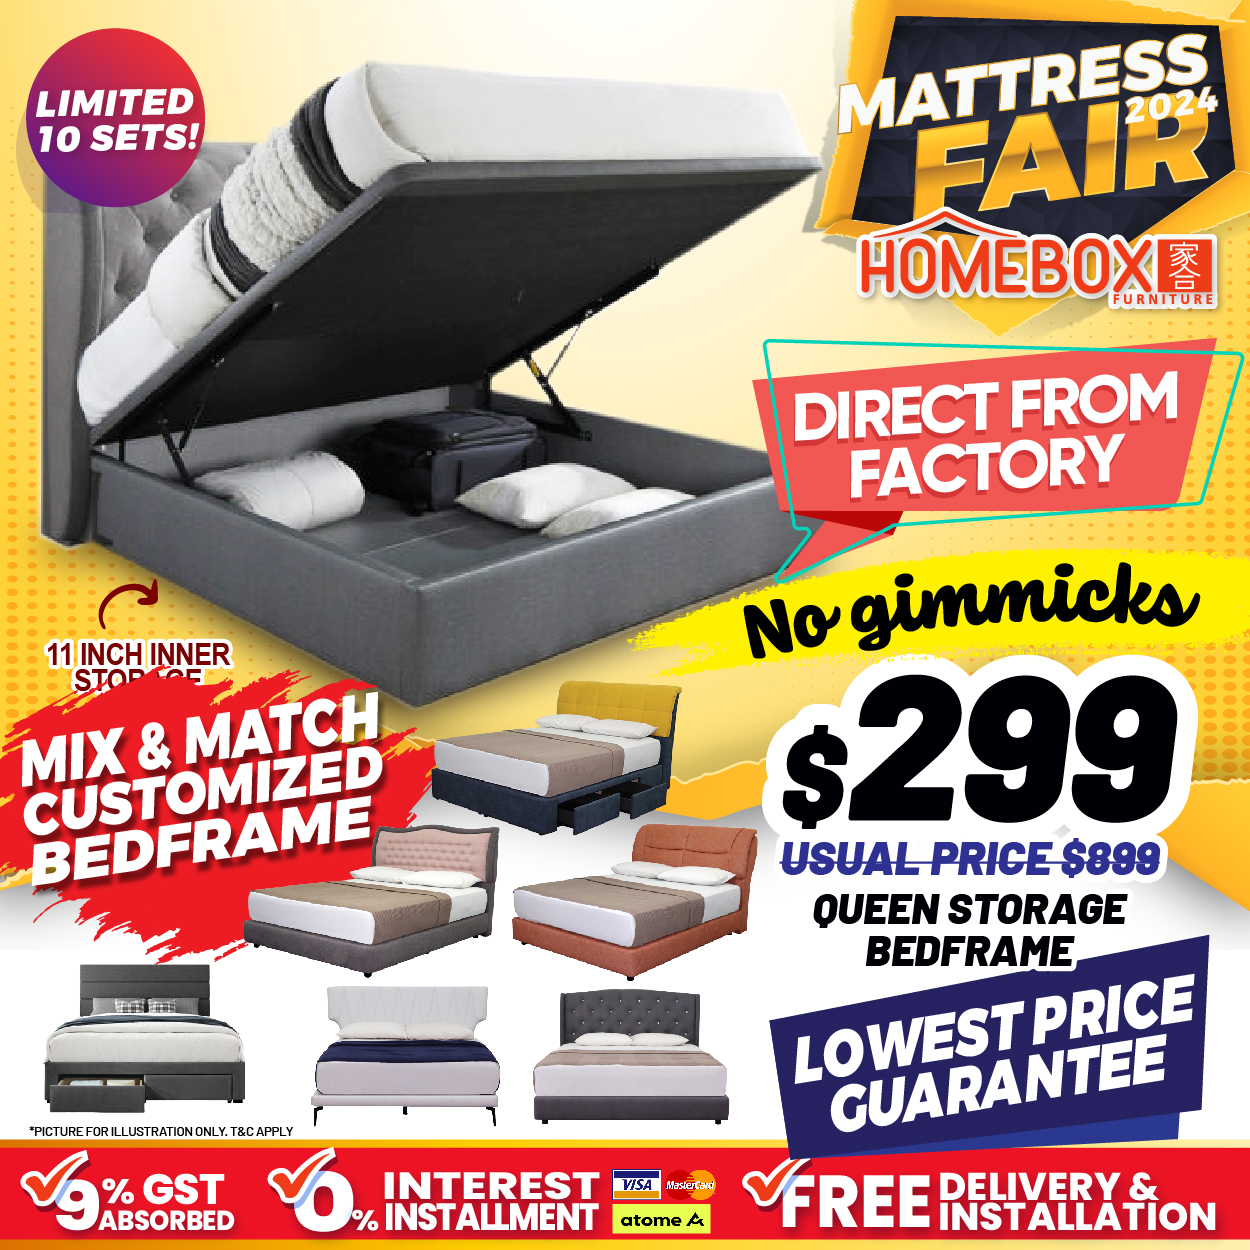 Lobang: Homebox's Biggest Mattress Fair in Aljunied Has Everything At Up To 80% Off From Now Till 5 May 24. Get A Free Mattres Upgrade During The Sale! - 7